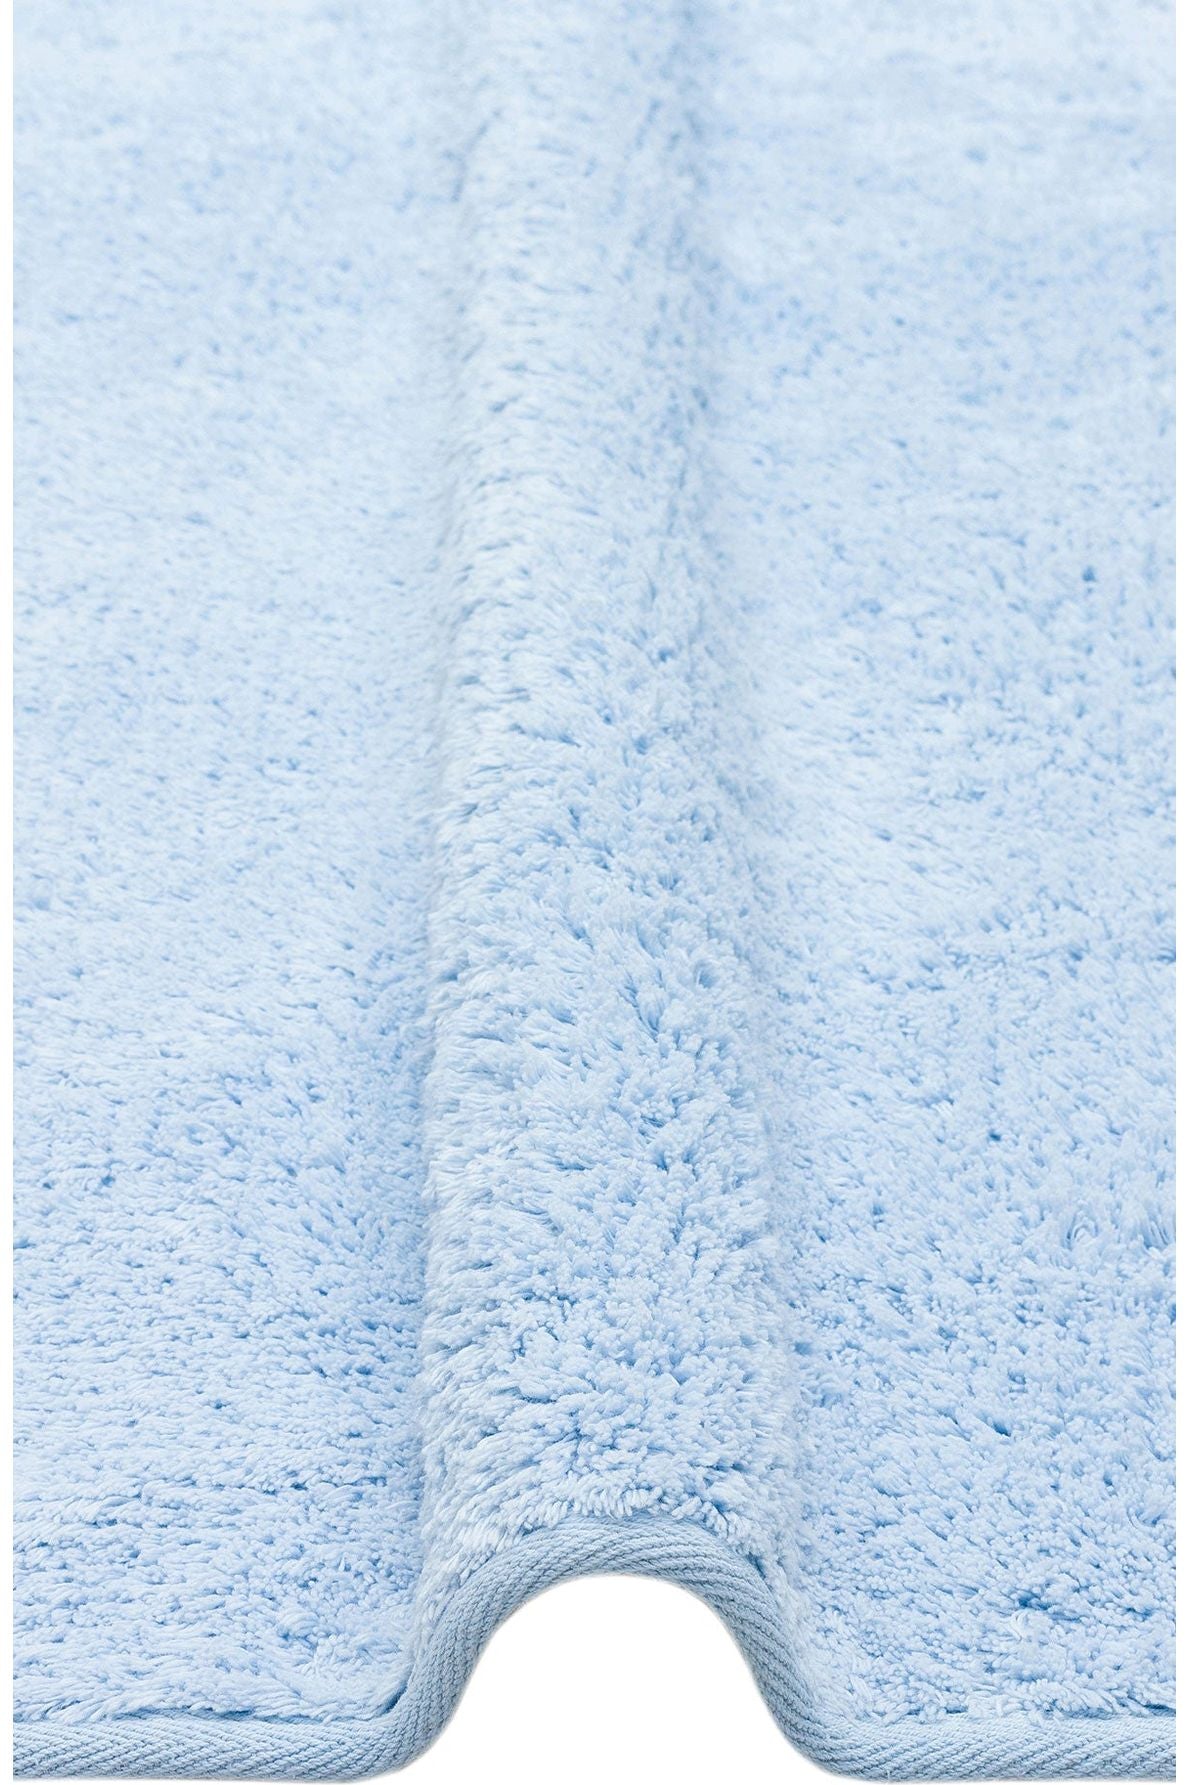 #Turkish_Carpets_Rugs# #Modern_Carpets# #Abrash_Carpets#Washable, Non-Slippary, Natural Baby Rugs With CottonCbn Plain Blue Q